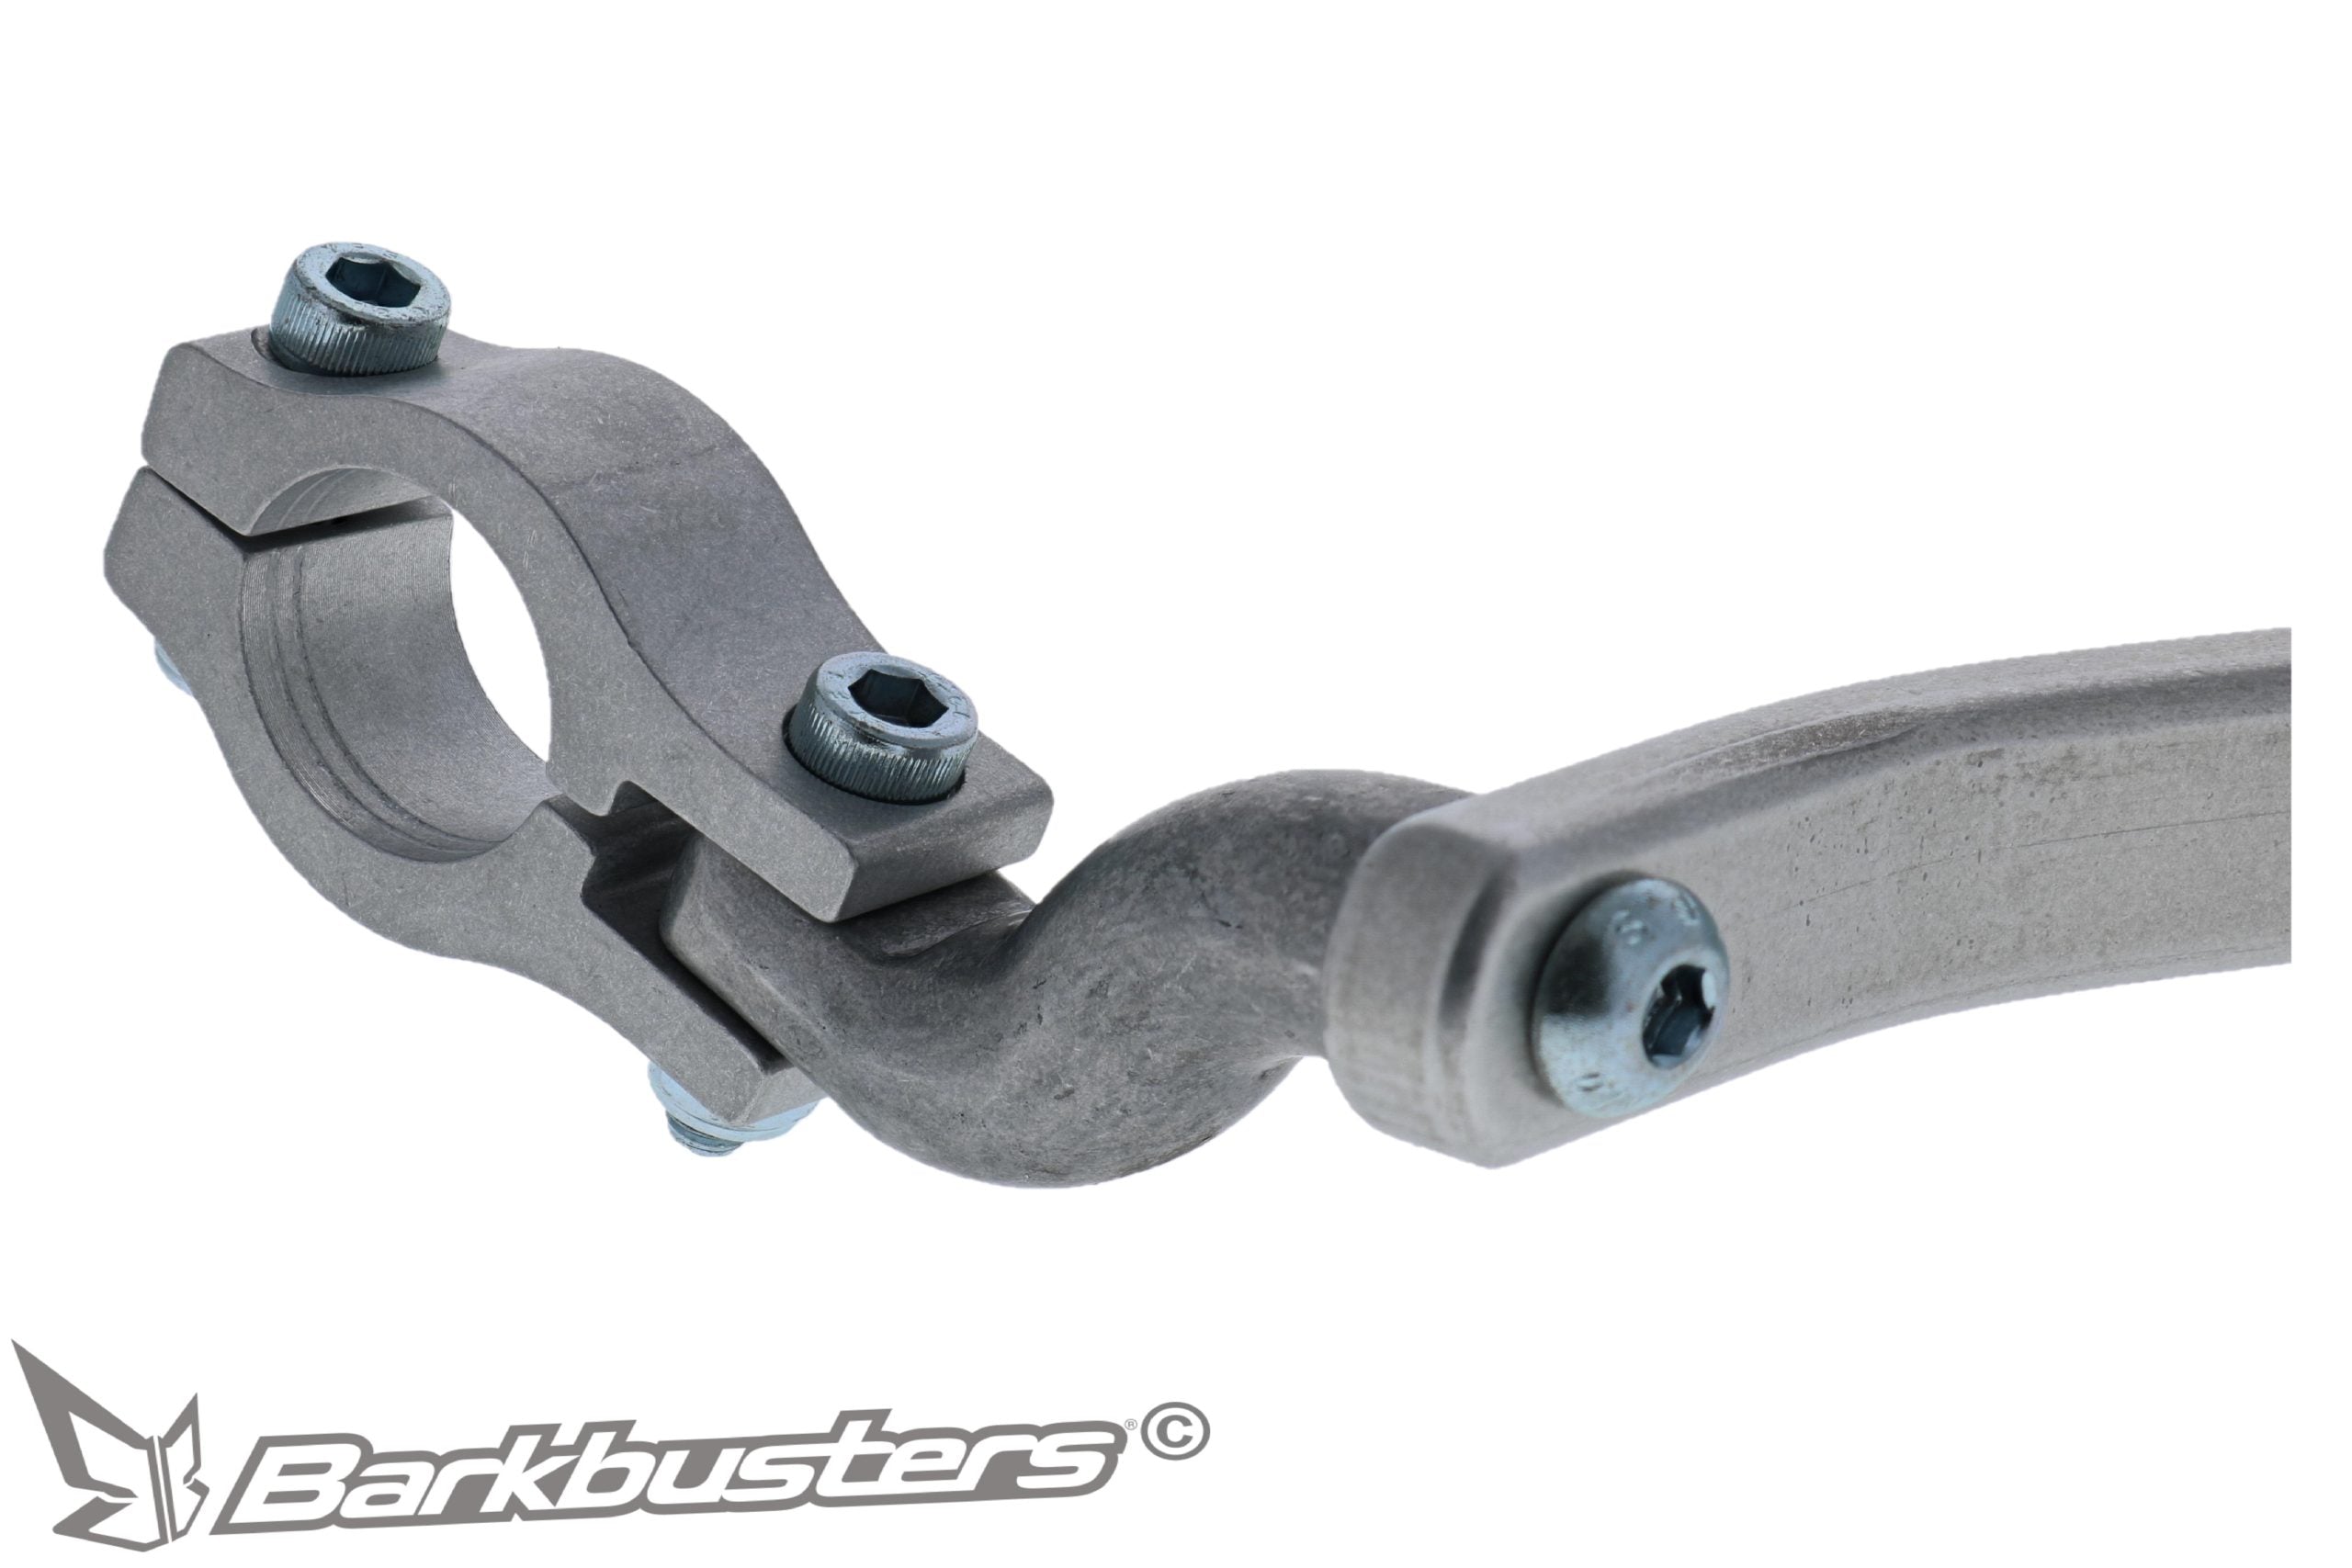 Barkbusters - Two Point Mount for Yamaha XTZ700 Tenere ('19 on)